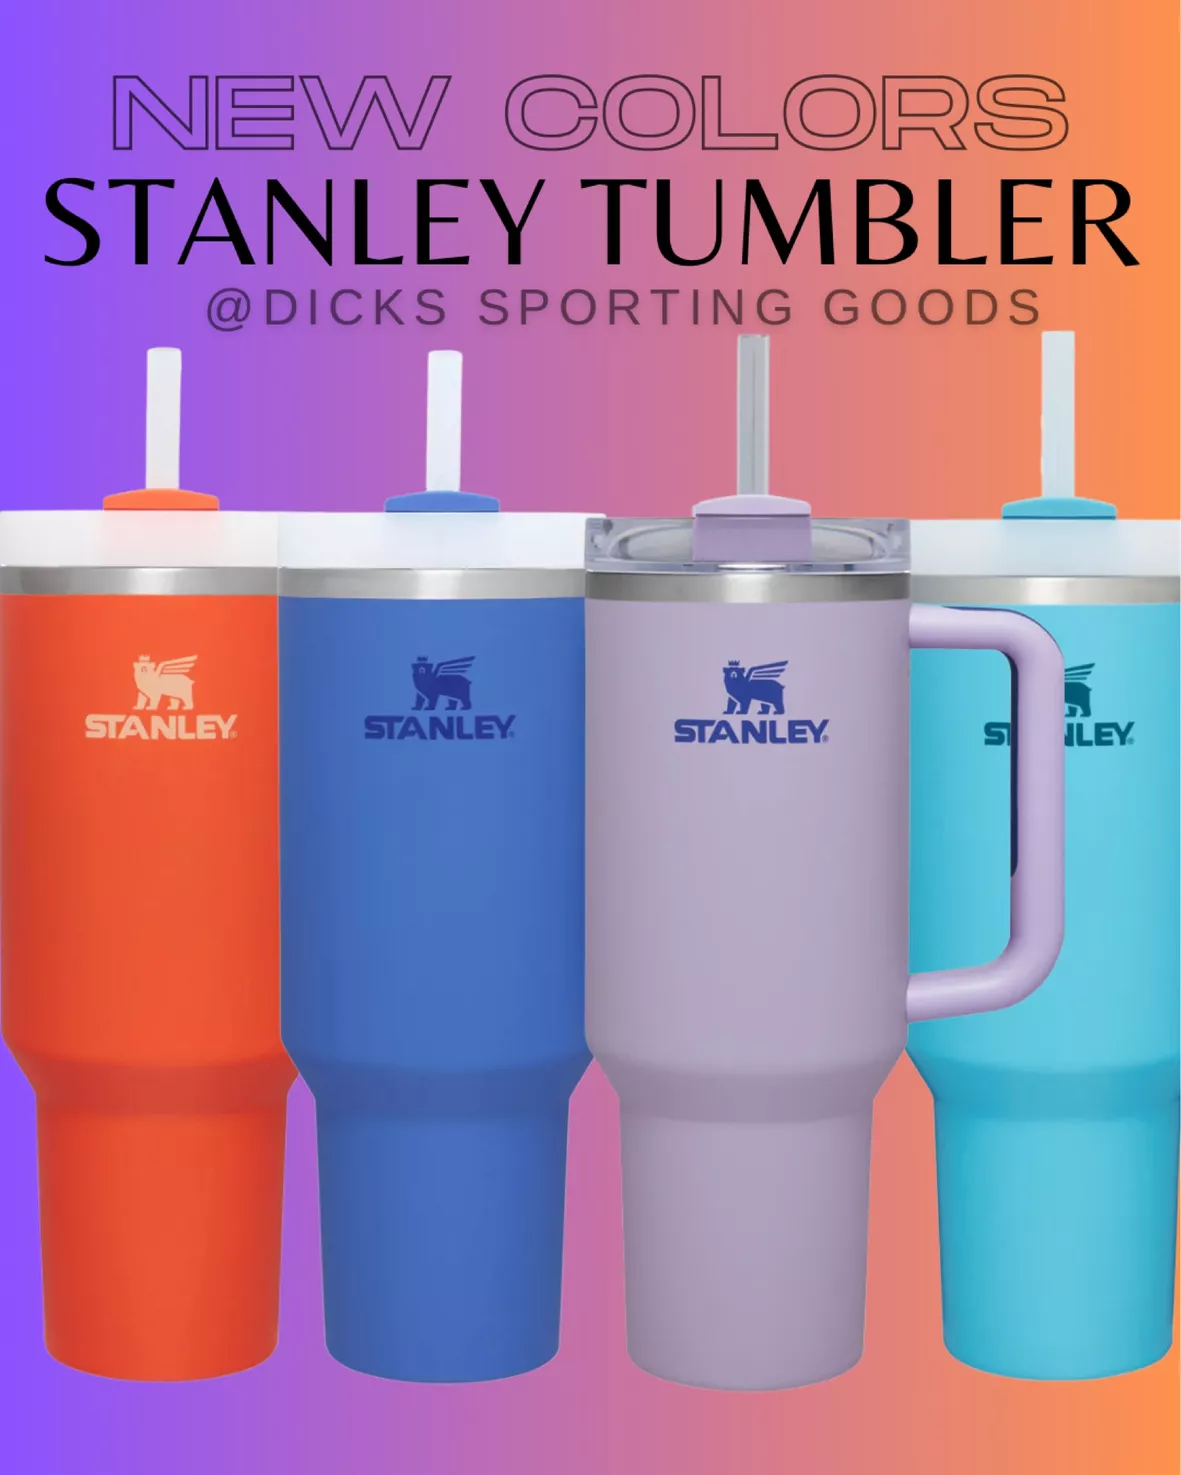 OK, 4 new Stanley Cup colors just dropped at DICK'S Sporting Goods